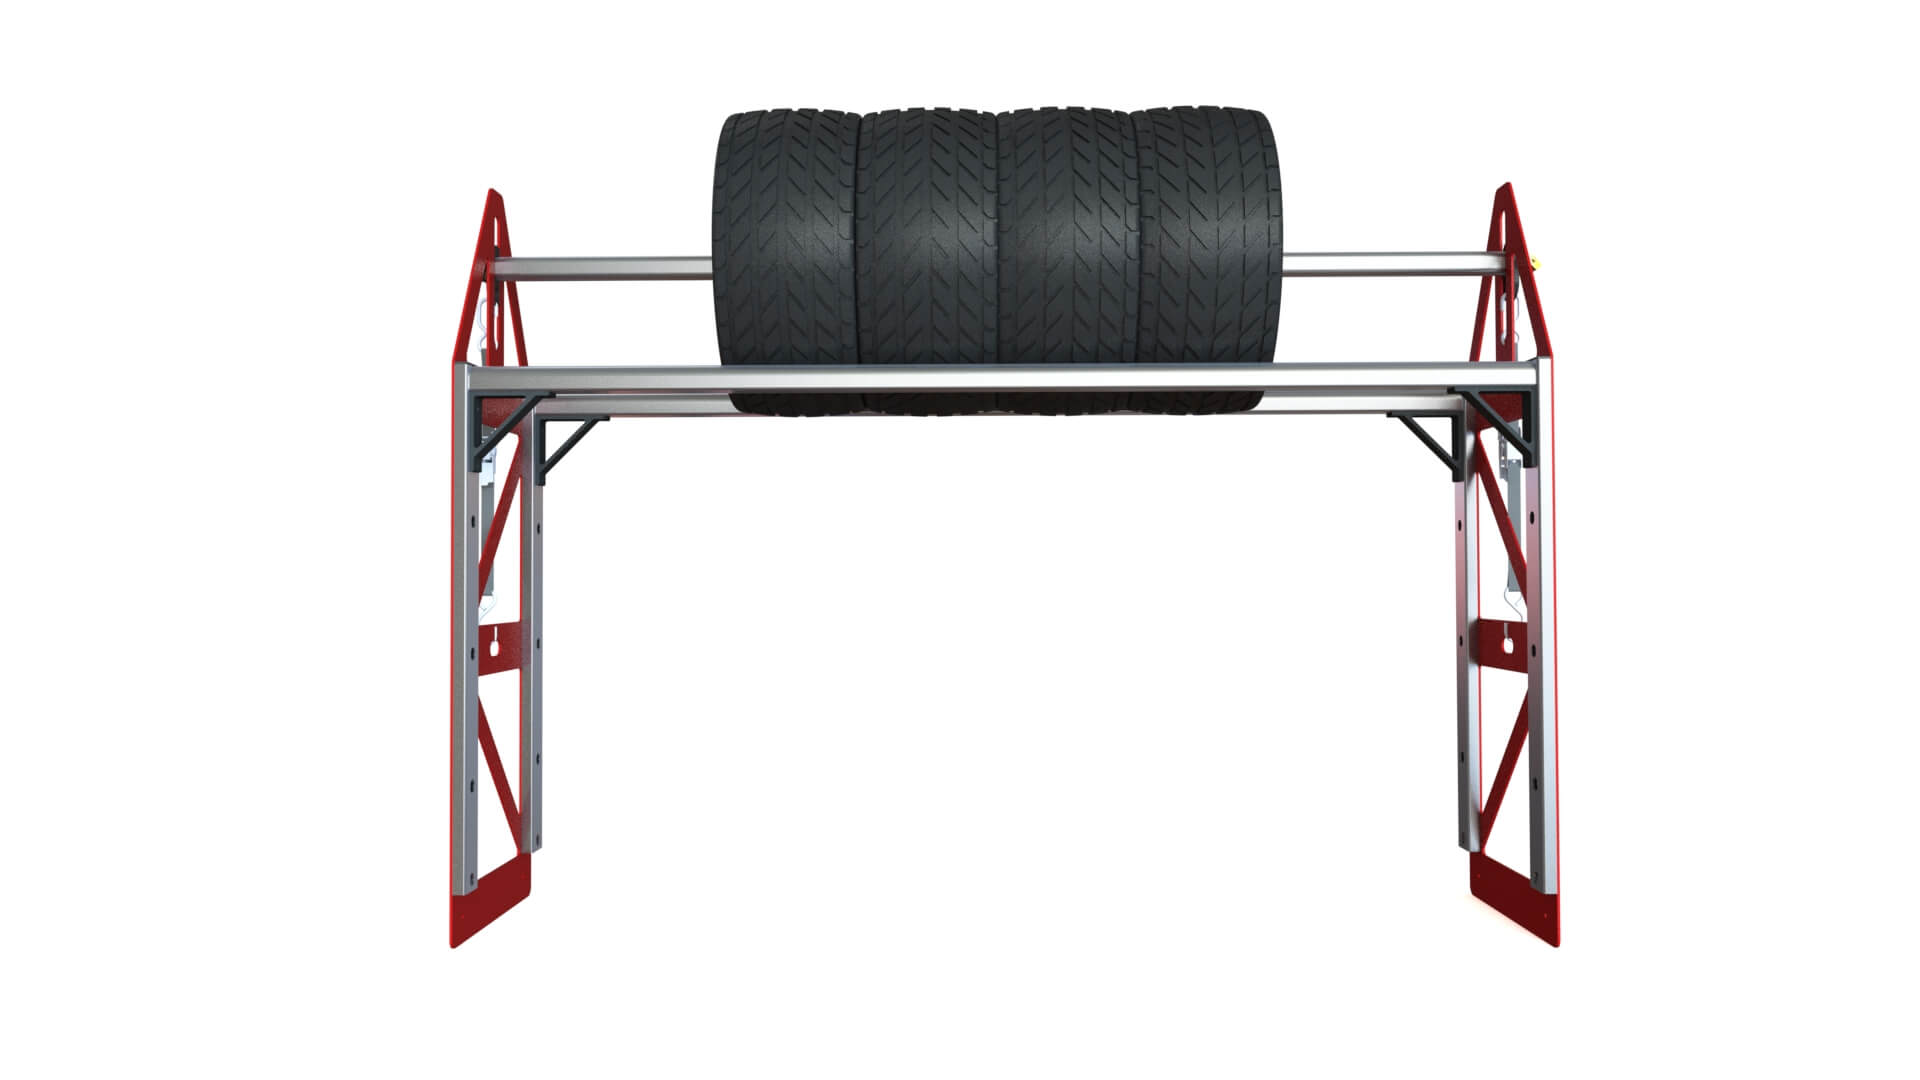 Copy of 3 Futura Tire Rack Extended front view